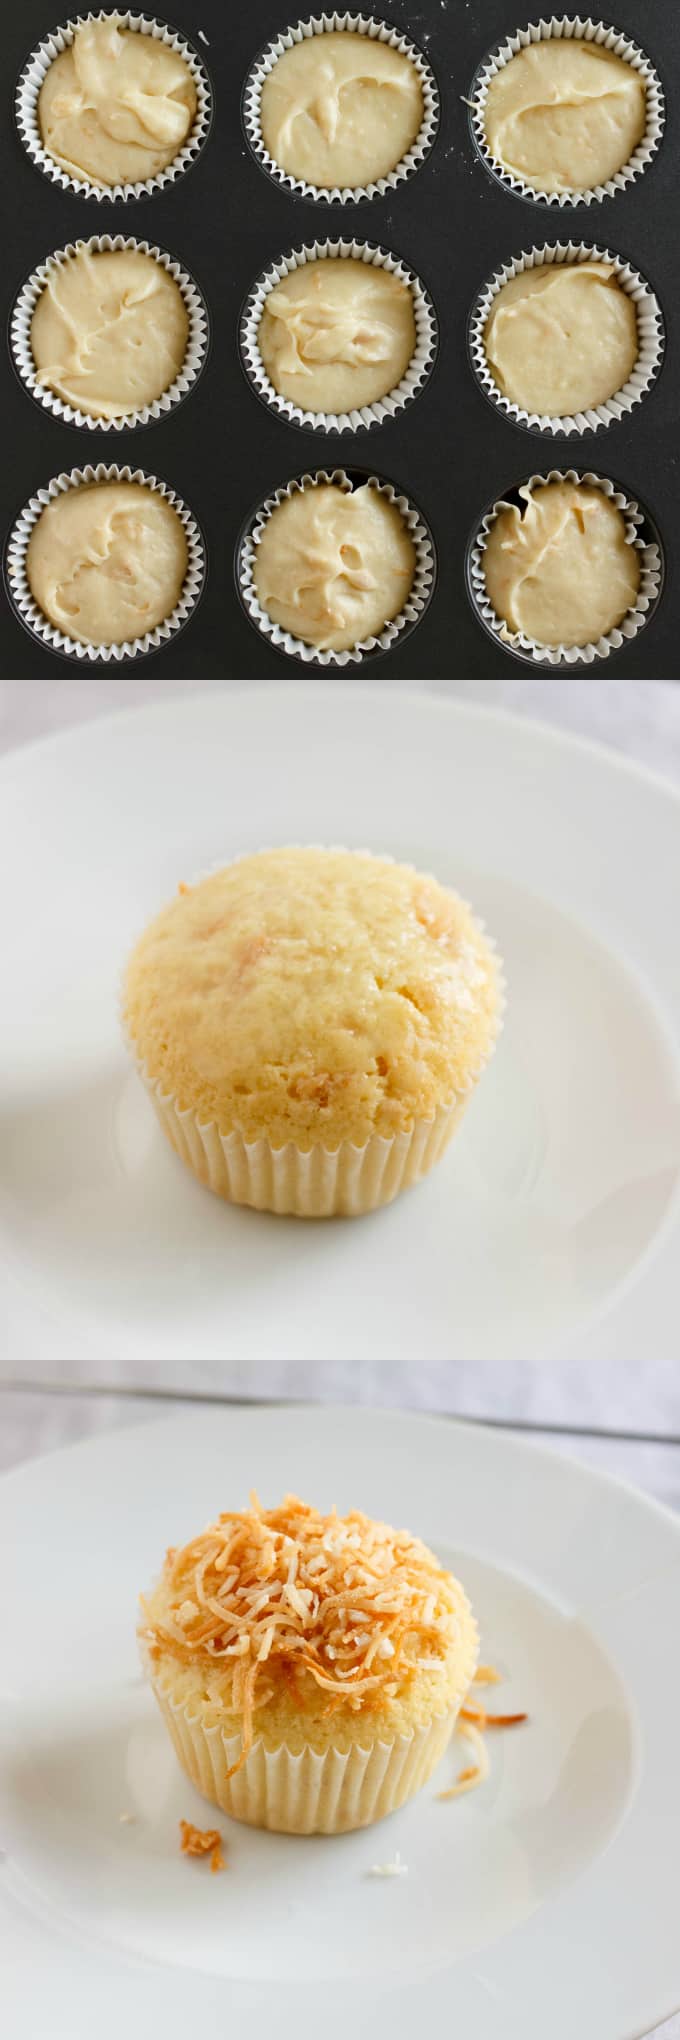 Toasted Coconut Cupcakes with Coconut Glaze in mold, with and without coconut glaze on white plate